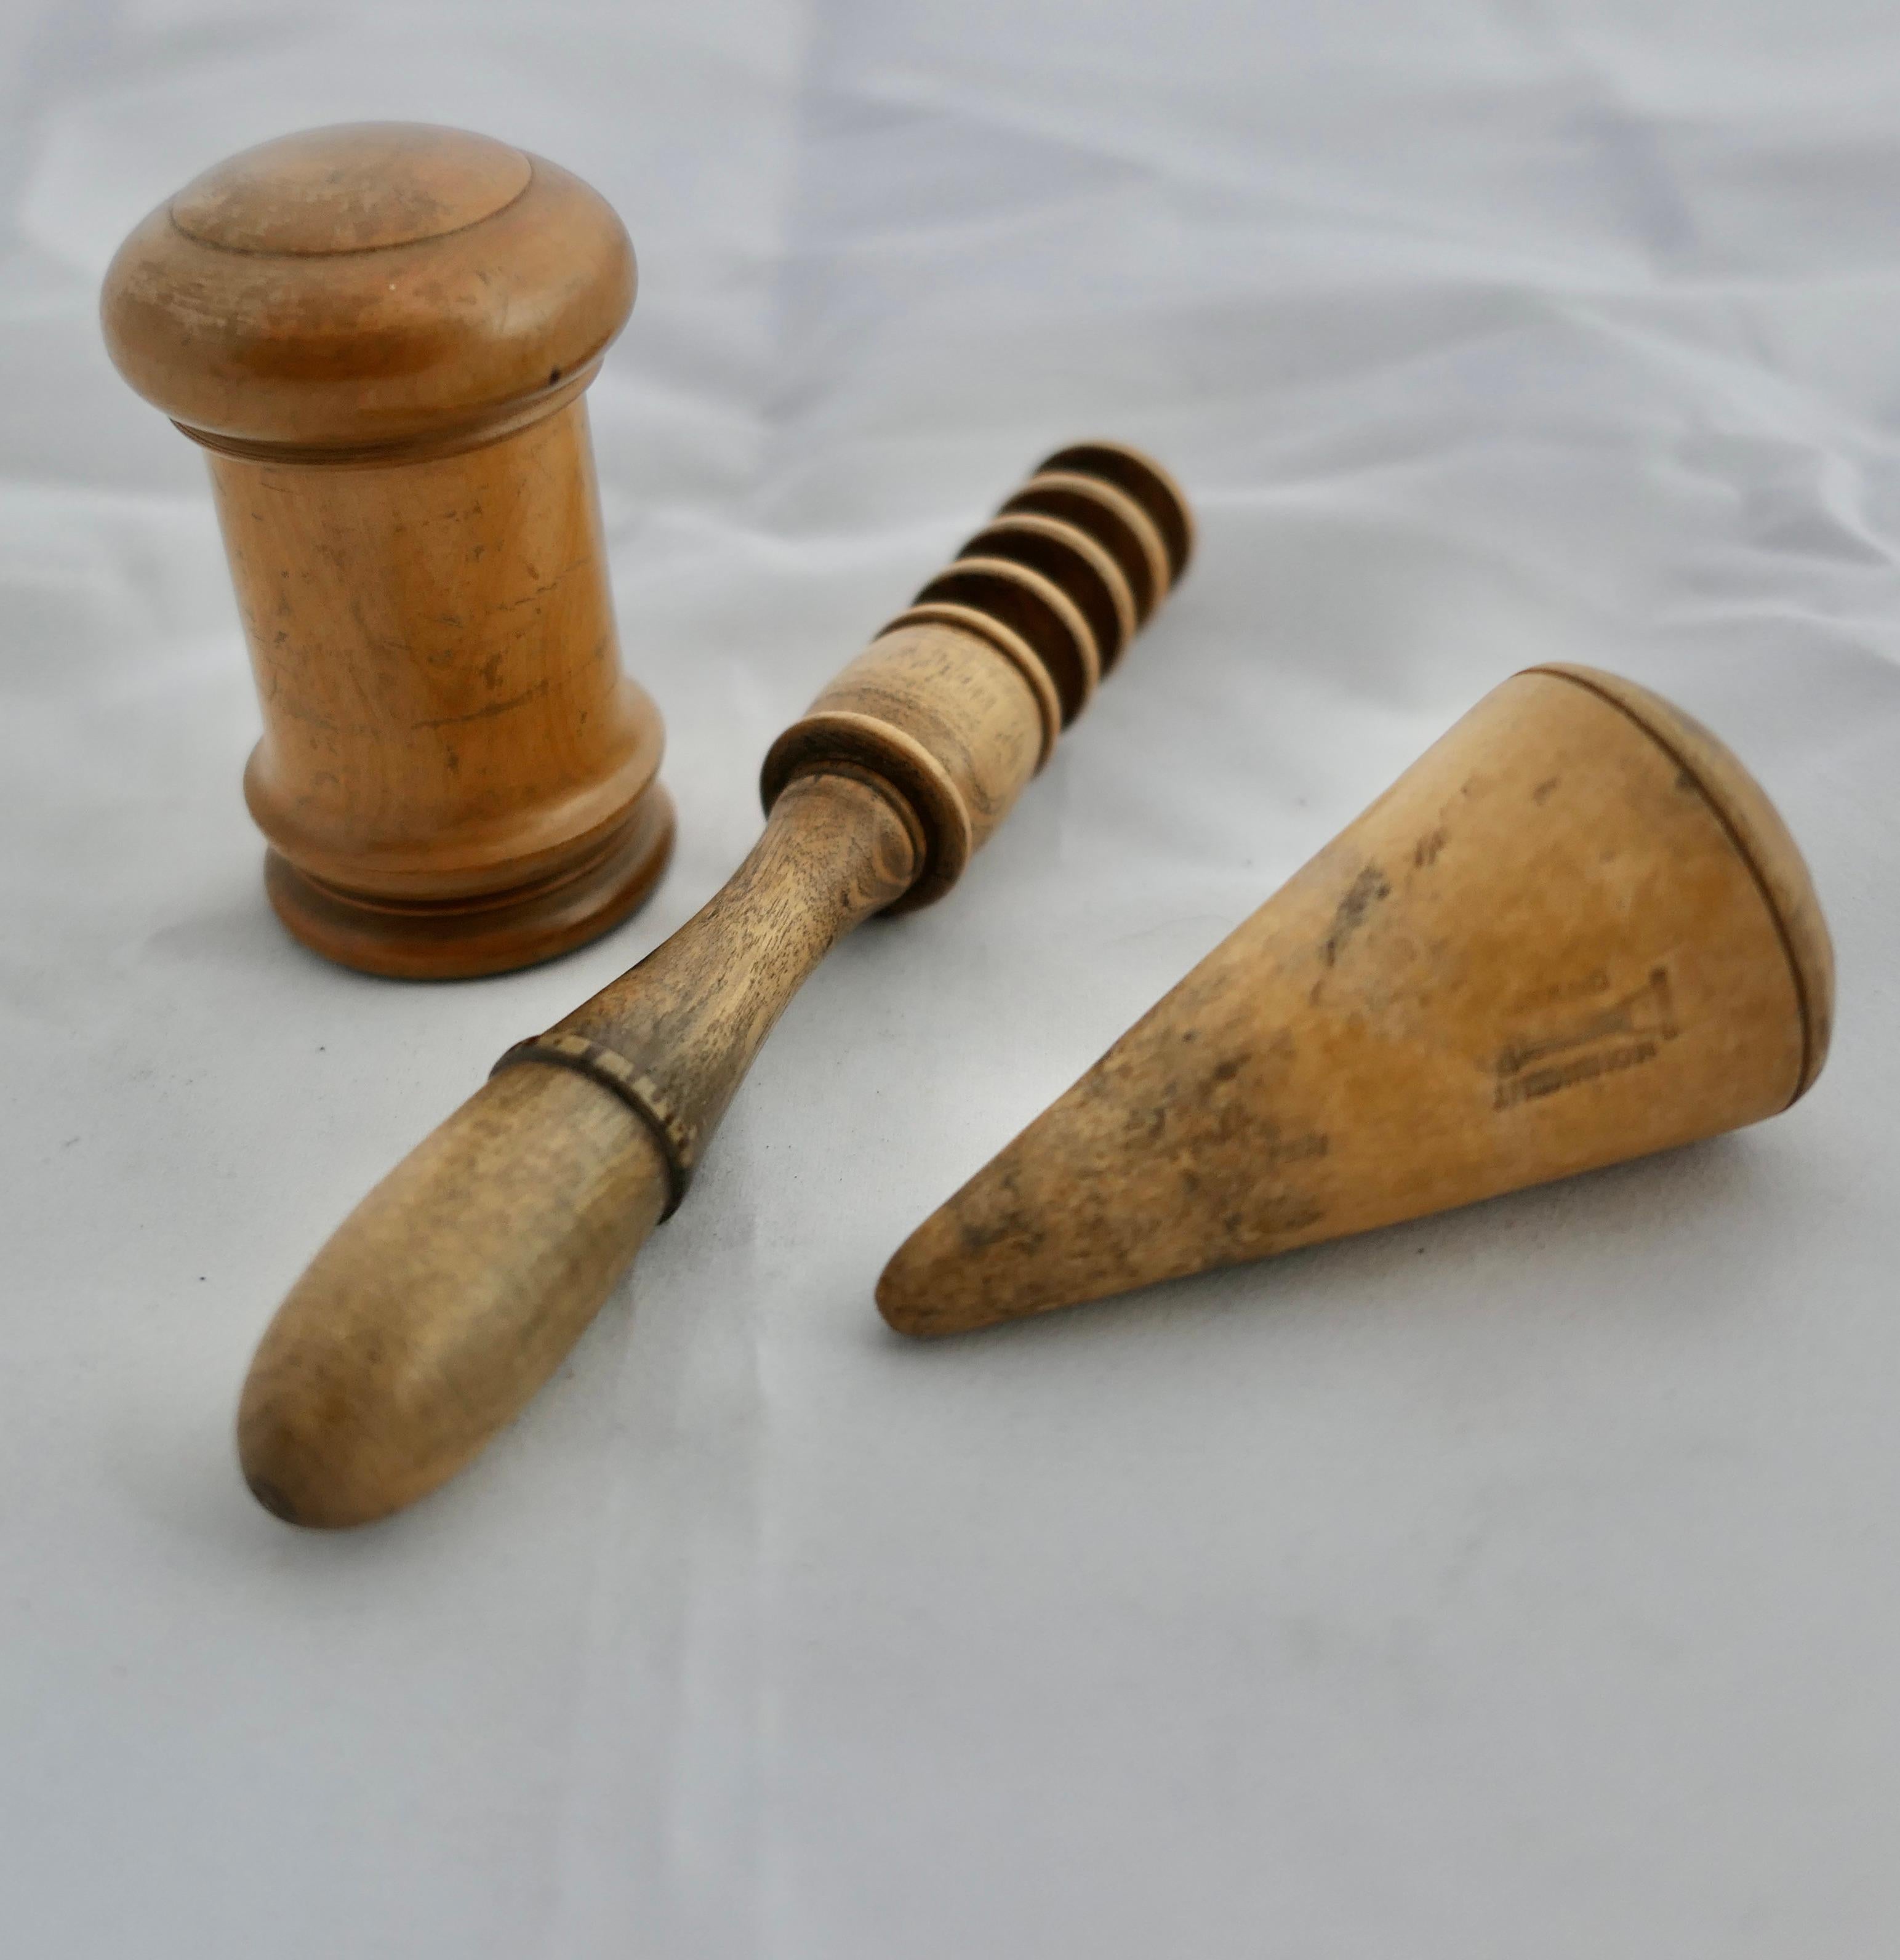 3 19th century Hand Made Treen Items, Pounce, Plumb Bob, Bodkin

An interesting sewing item with a bodkin, needle case and thread winder in one, a Sycamore plumb bob, and a ponce pot which opened at both ends
The pot  is 41.5” in diameter and 2.5”